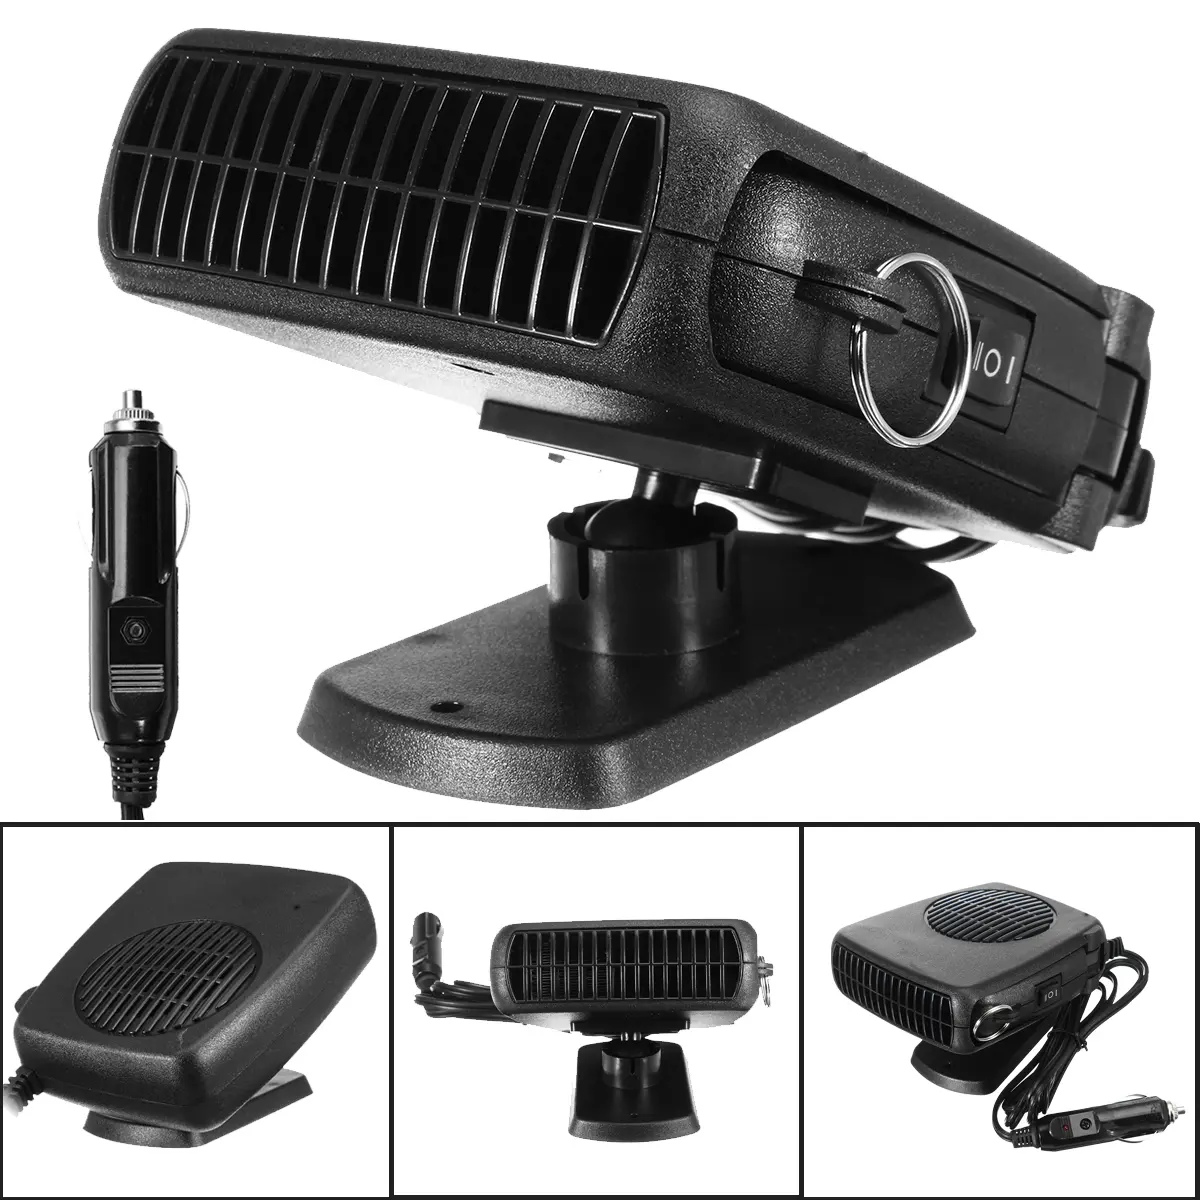 12V 150W Three-In-One Car Heater Cold and Warm Machine Hot Air Cold Wind And Defrosting